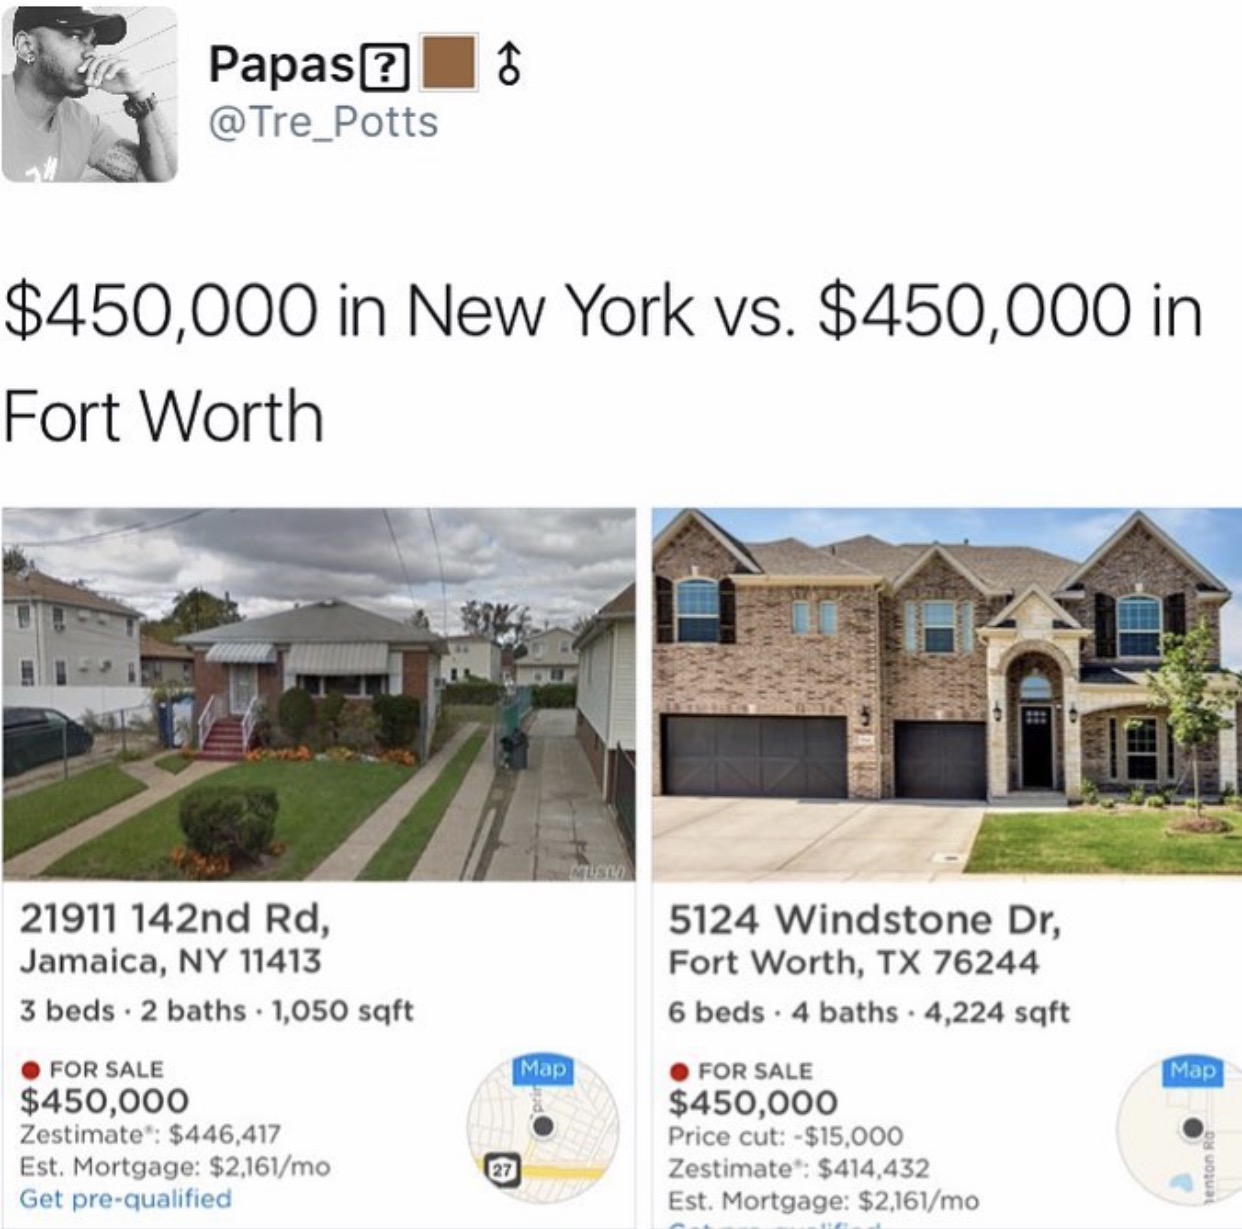 texas vs ny houses - Papas? $450,000 in New York vs. $450,000 in Fort Worth Museo 21911 142nd Rd, Jamaica, Ny 11413 3 beds. 2 baths. 1,050 sqft 5124 Windstone Dr, Fort Worth, Tx 76244 6 beds. 4 baths. 4,224 sqft Map For Sale $450,000 Zestimate" $446,417 E